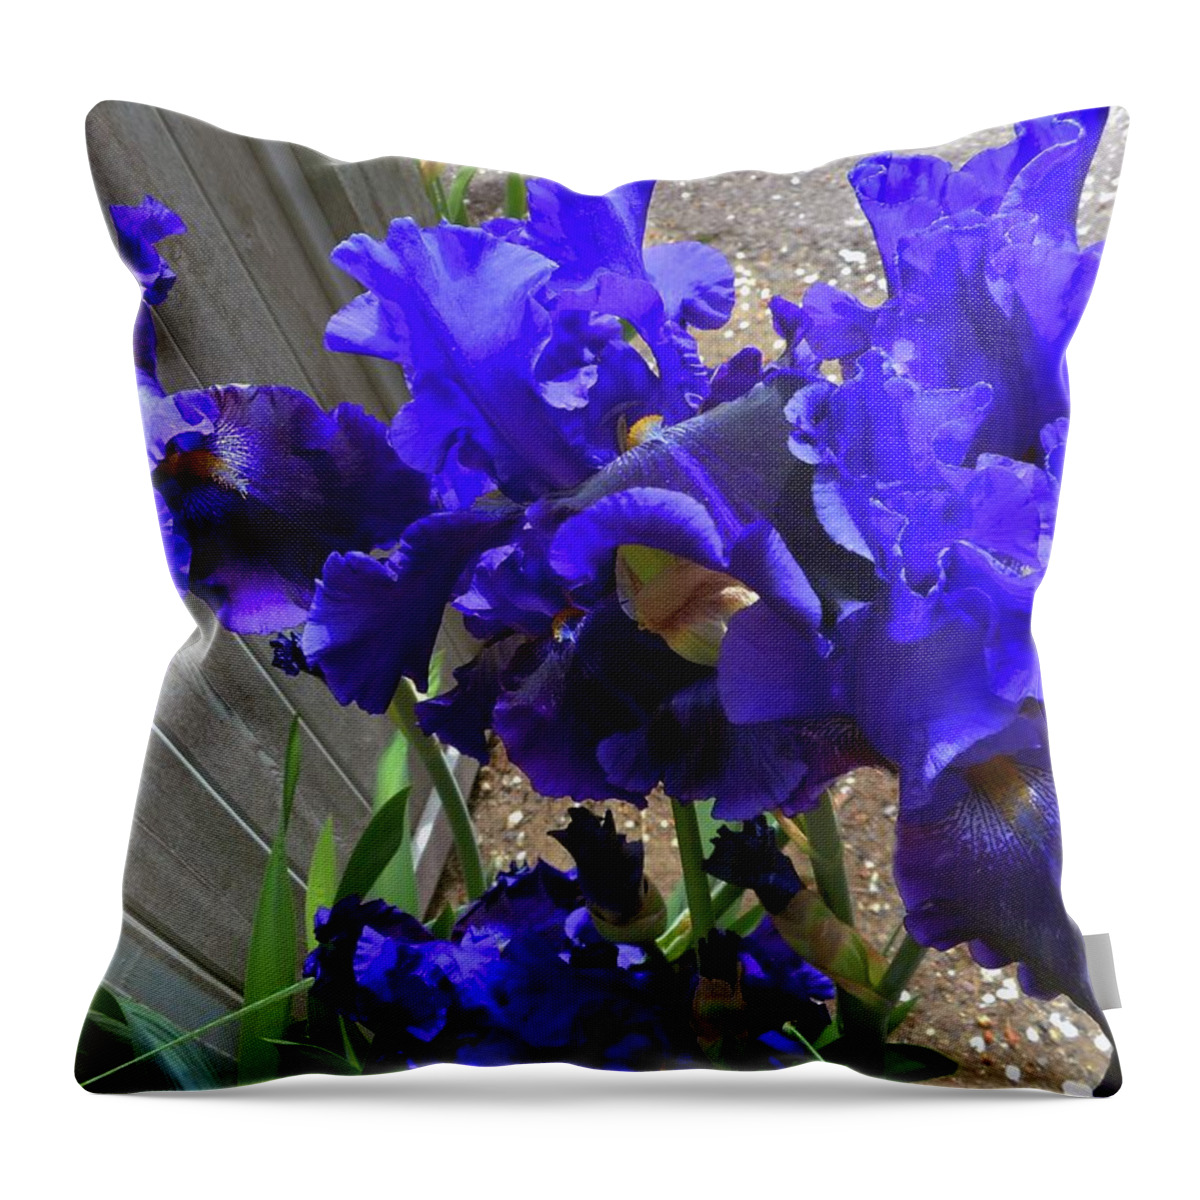 Iris Throw Pillow featuring the photograph Irises 26 by Ron Kandt